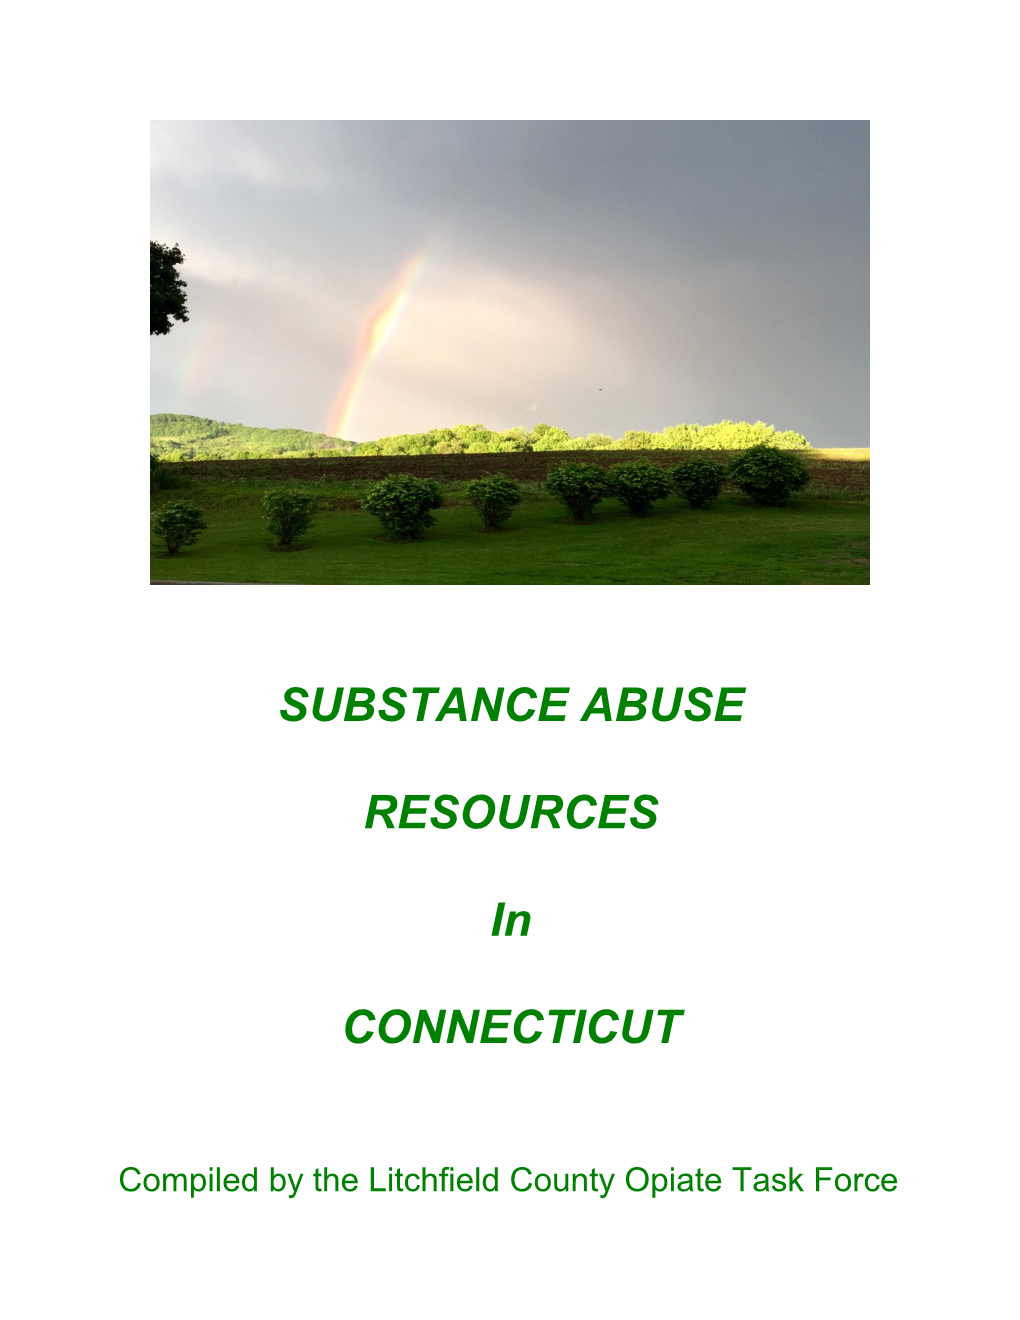 SUBSTANCE ABUSE RESOURCES in CONNECTICUT